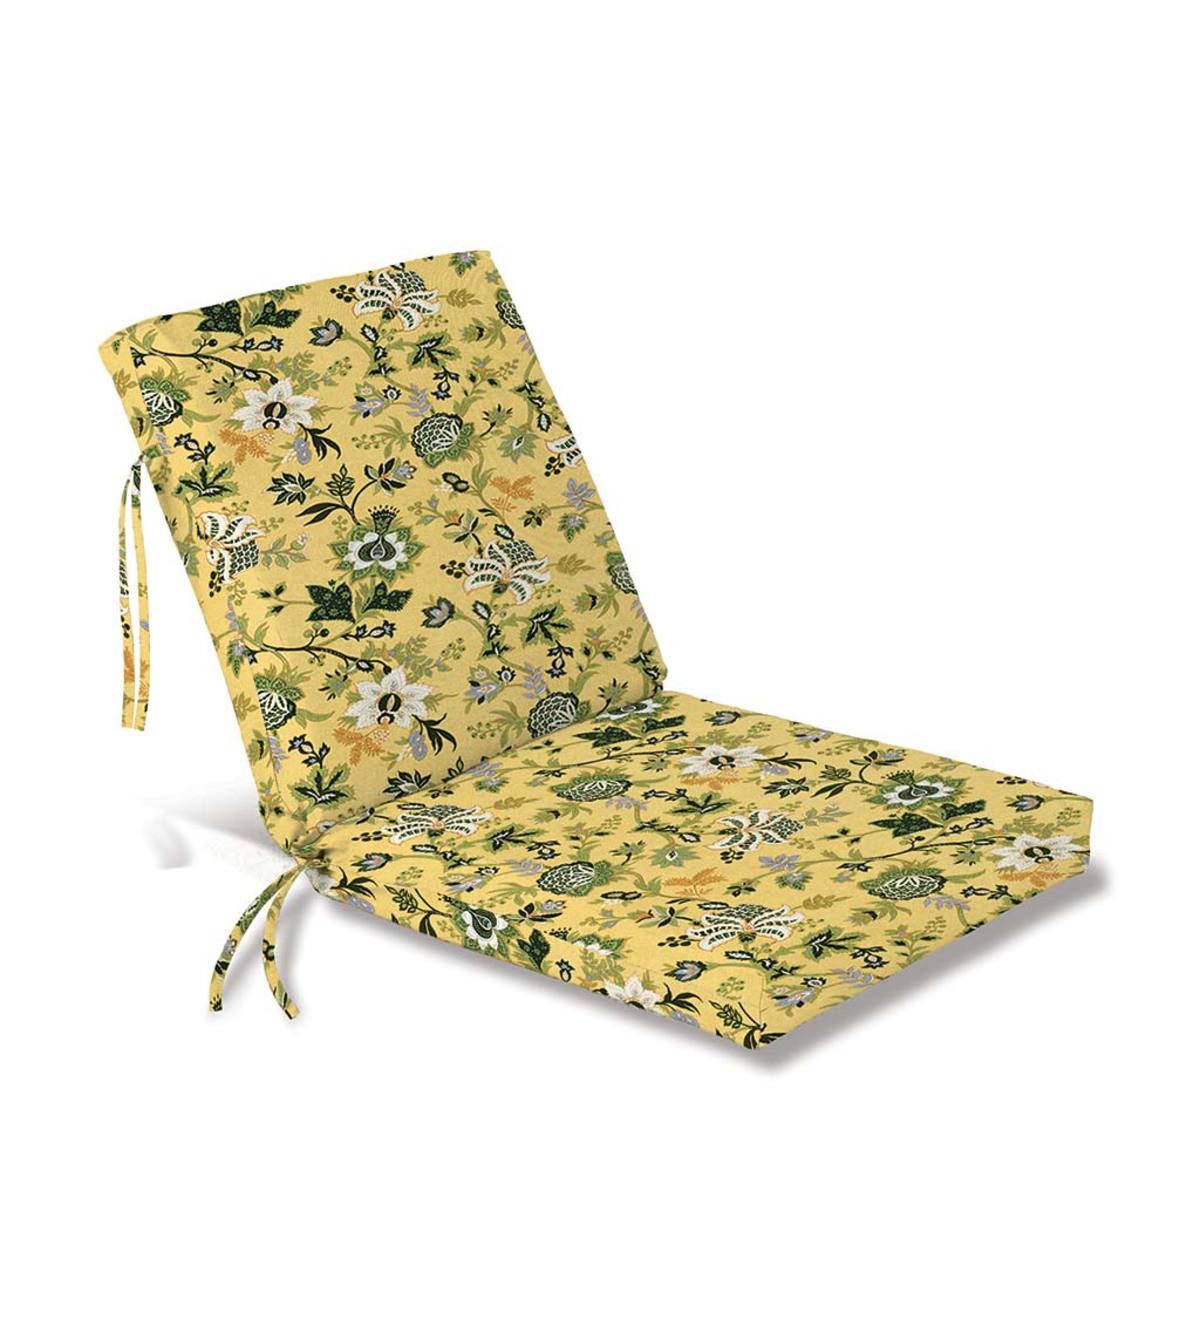 Hinged Outdoor Classic Chair Cushion With Ties